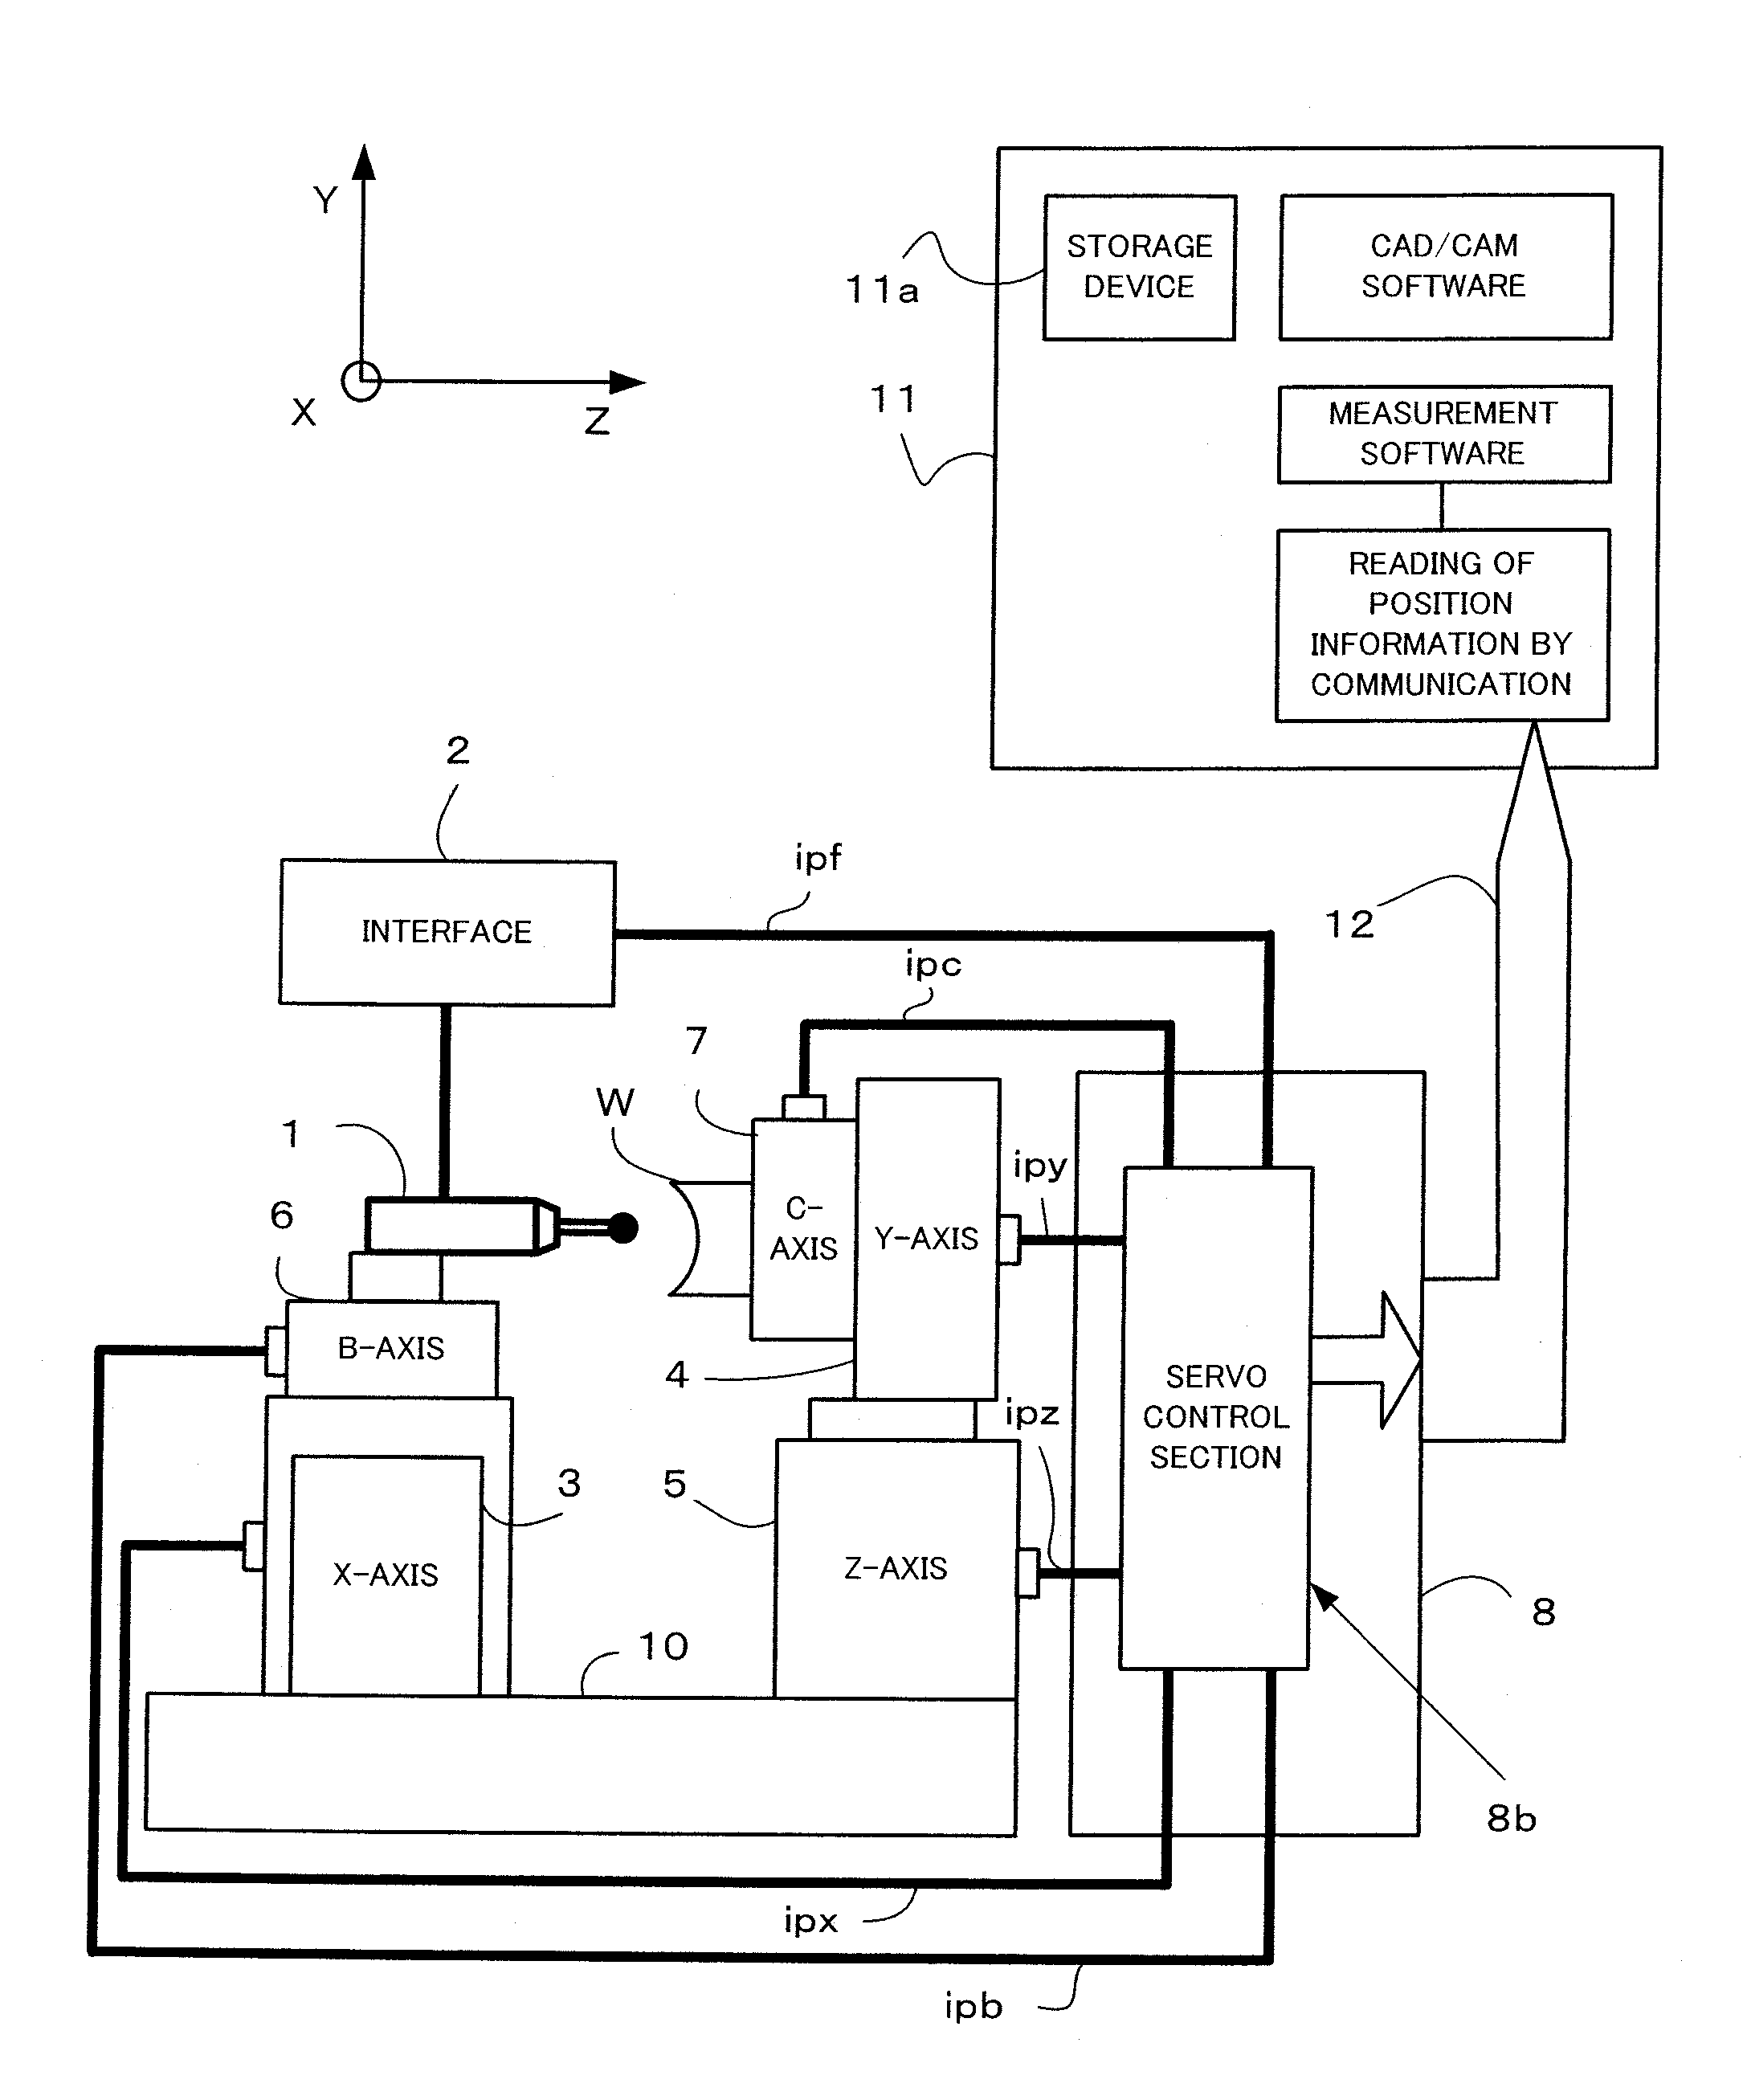 Machine tool with numerical controller and on-machine measuring device